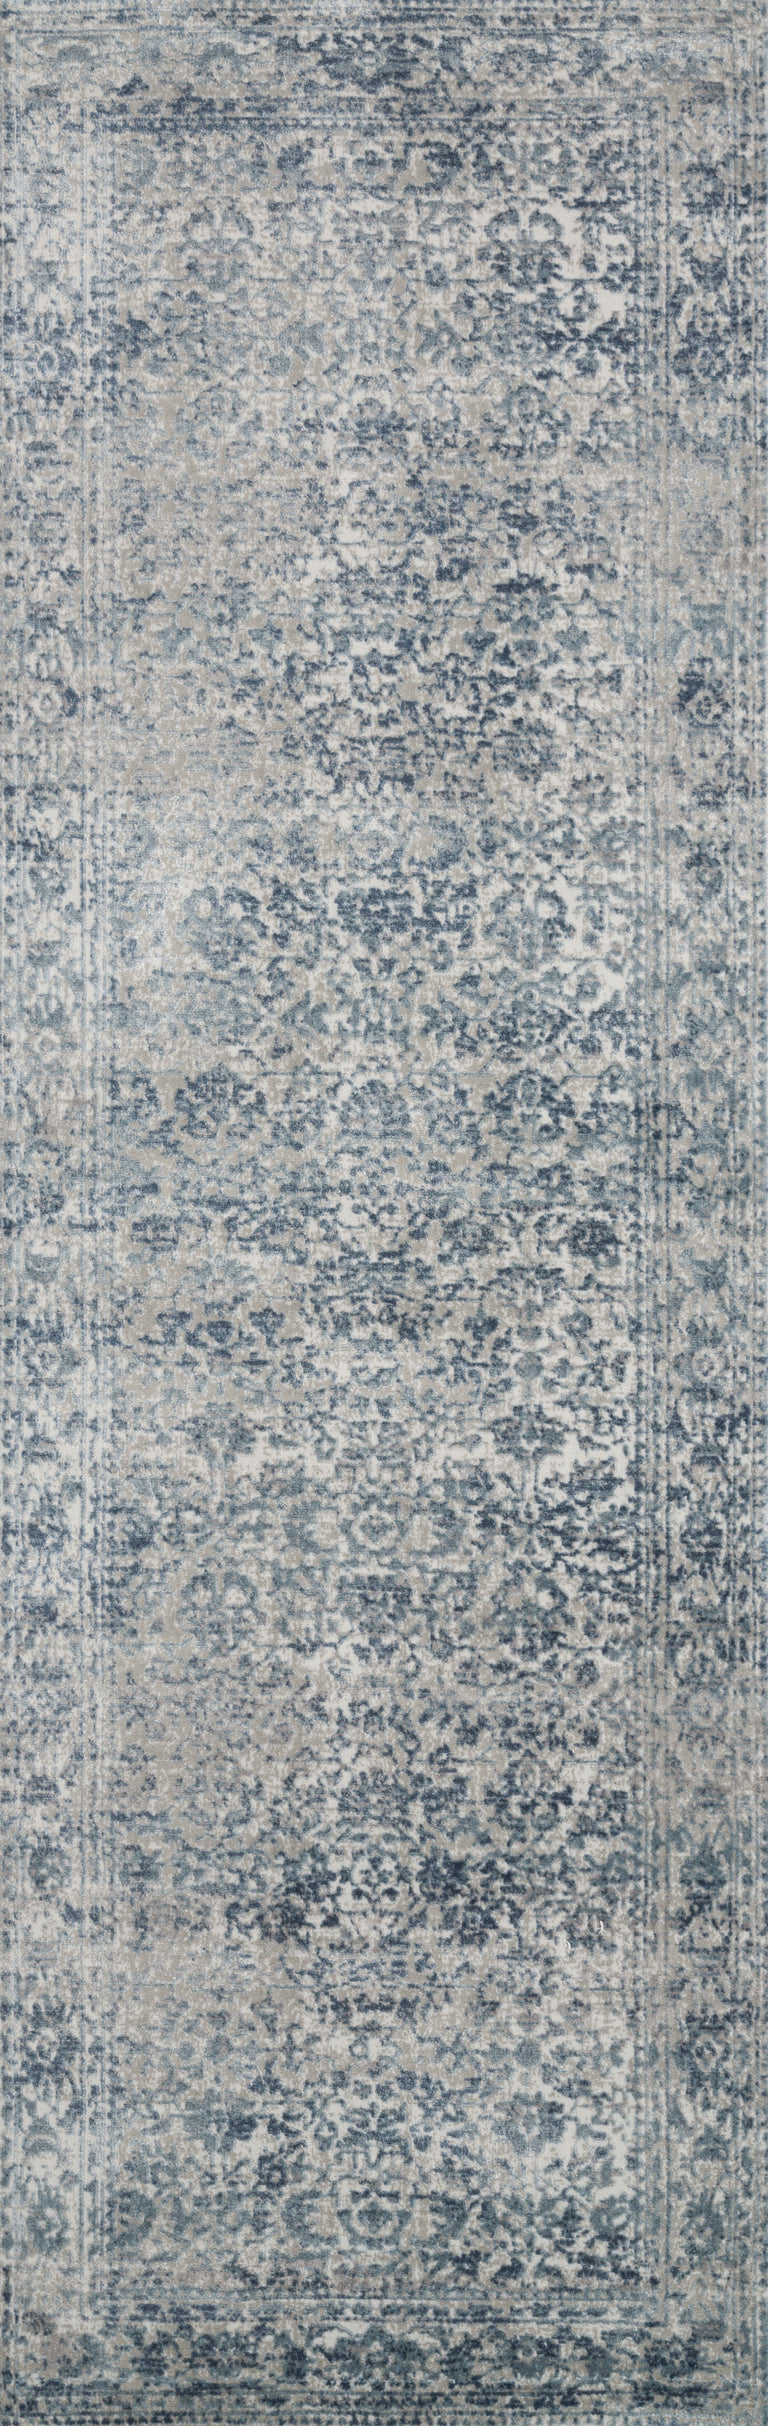 Loloi Rugs Patina Collection Rug in Sky, Stone - 6'7" x 9'2"